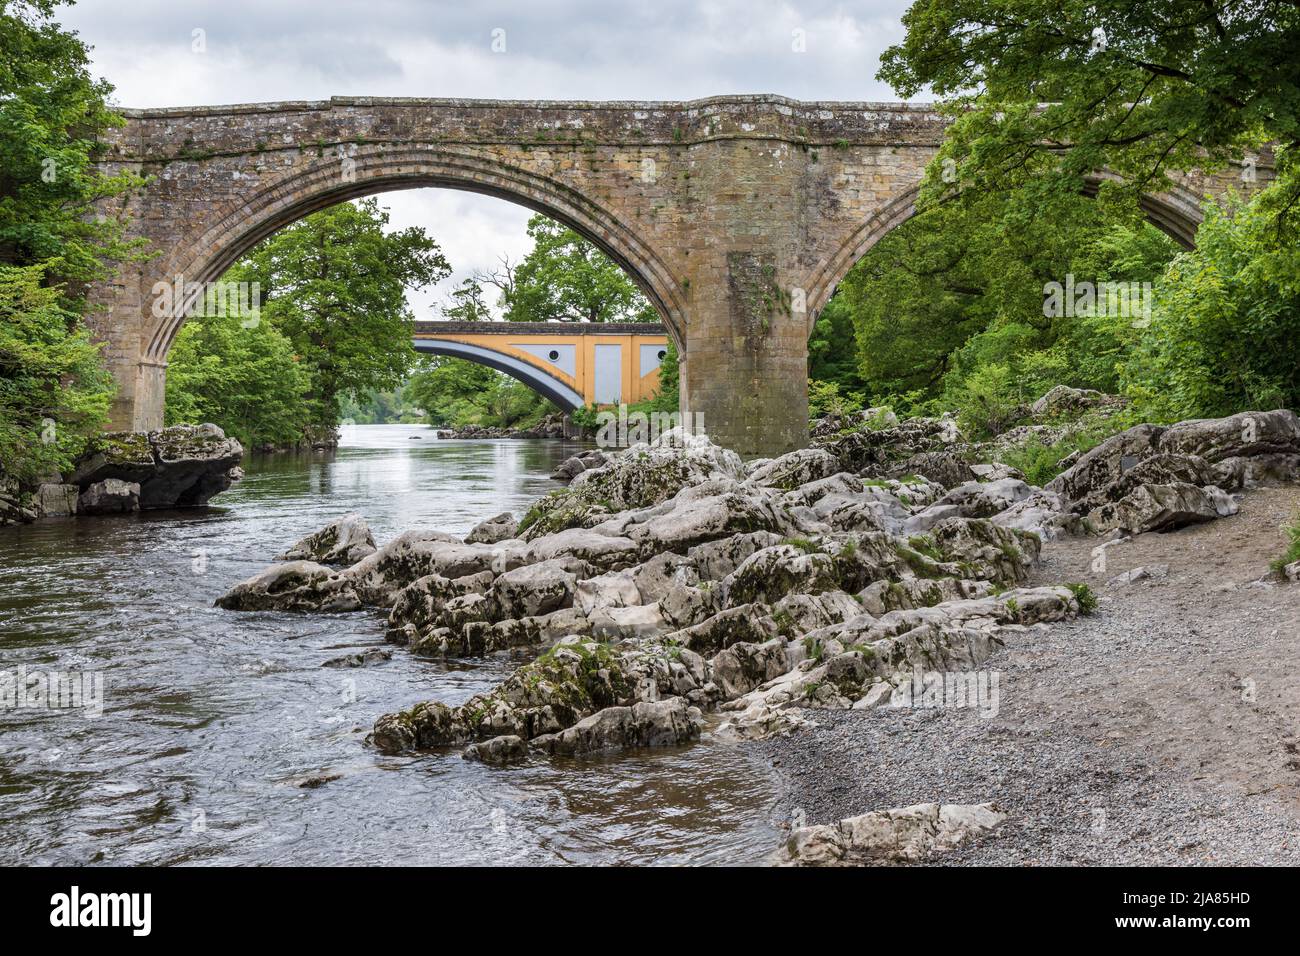 The famous Devil's Bridge, and the main A65 road bridge beyond, that cross the river Lune at Kirkby Lonsdale, Cumbria, England, Uk Stock Photo